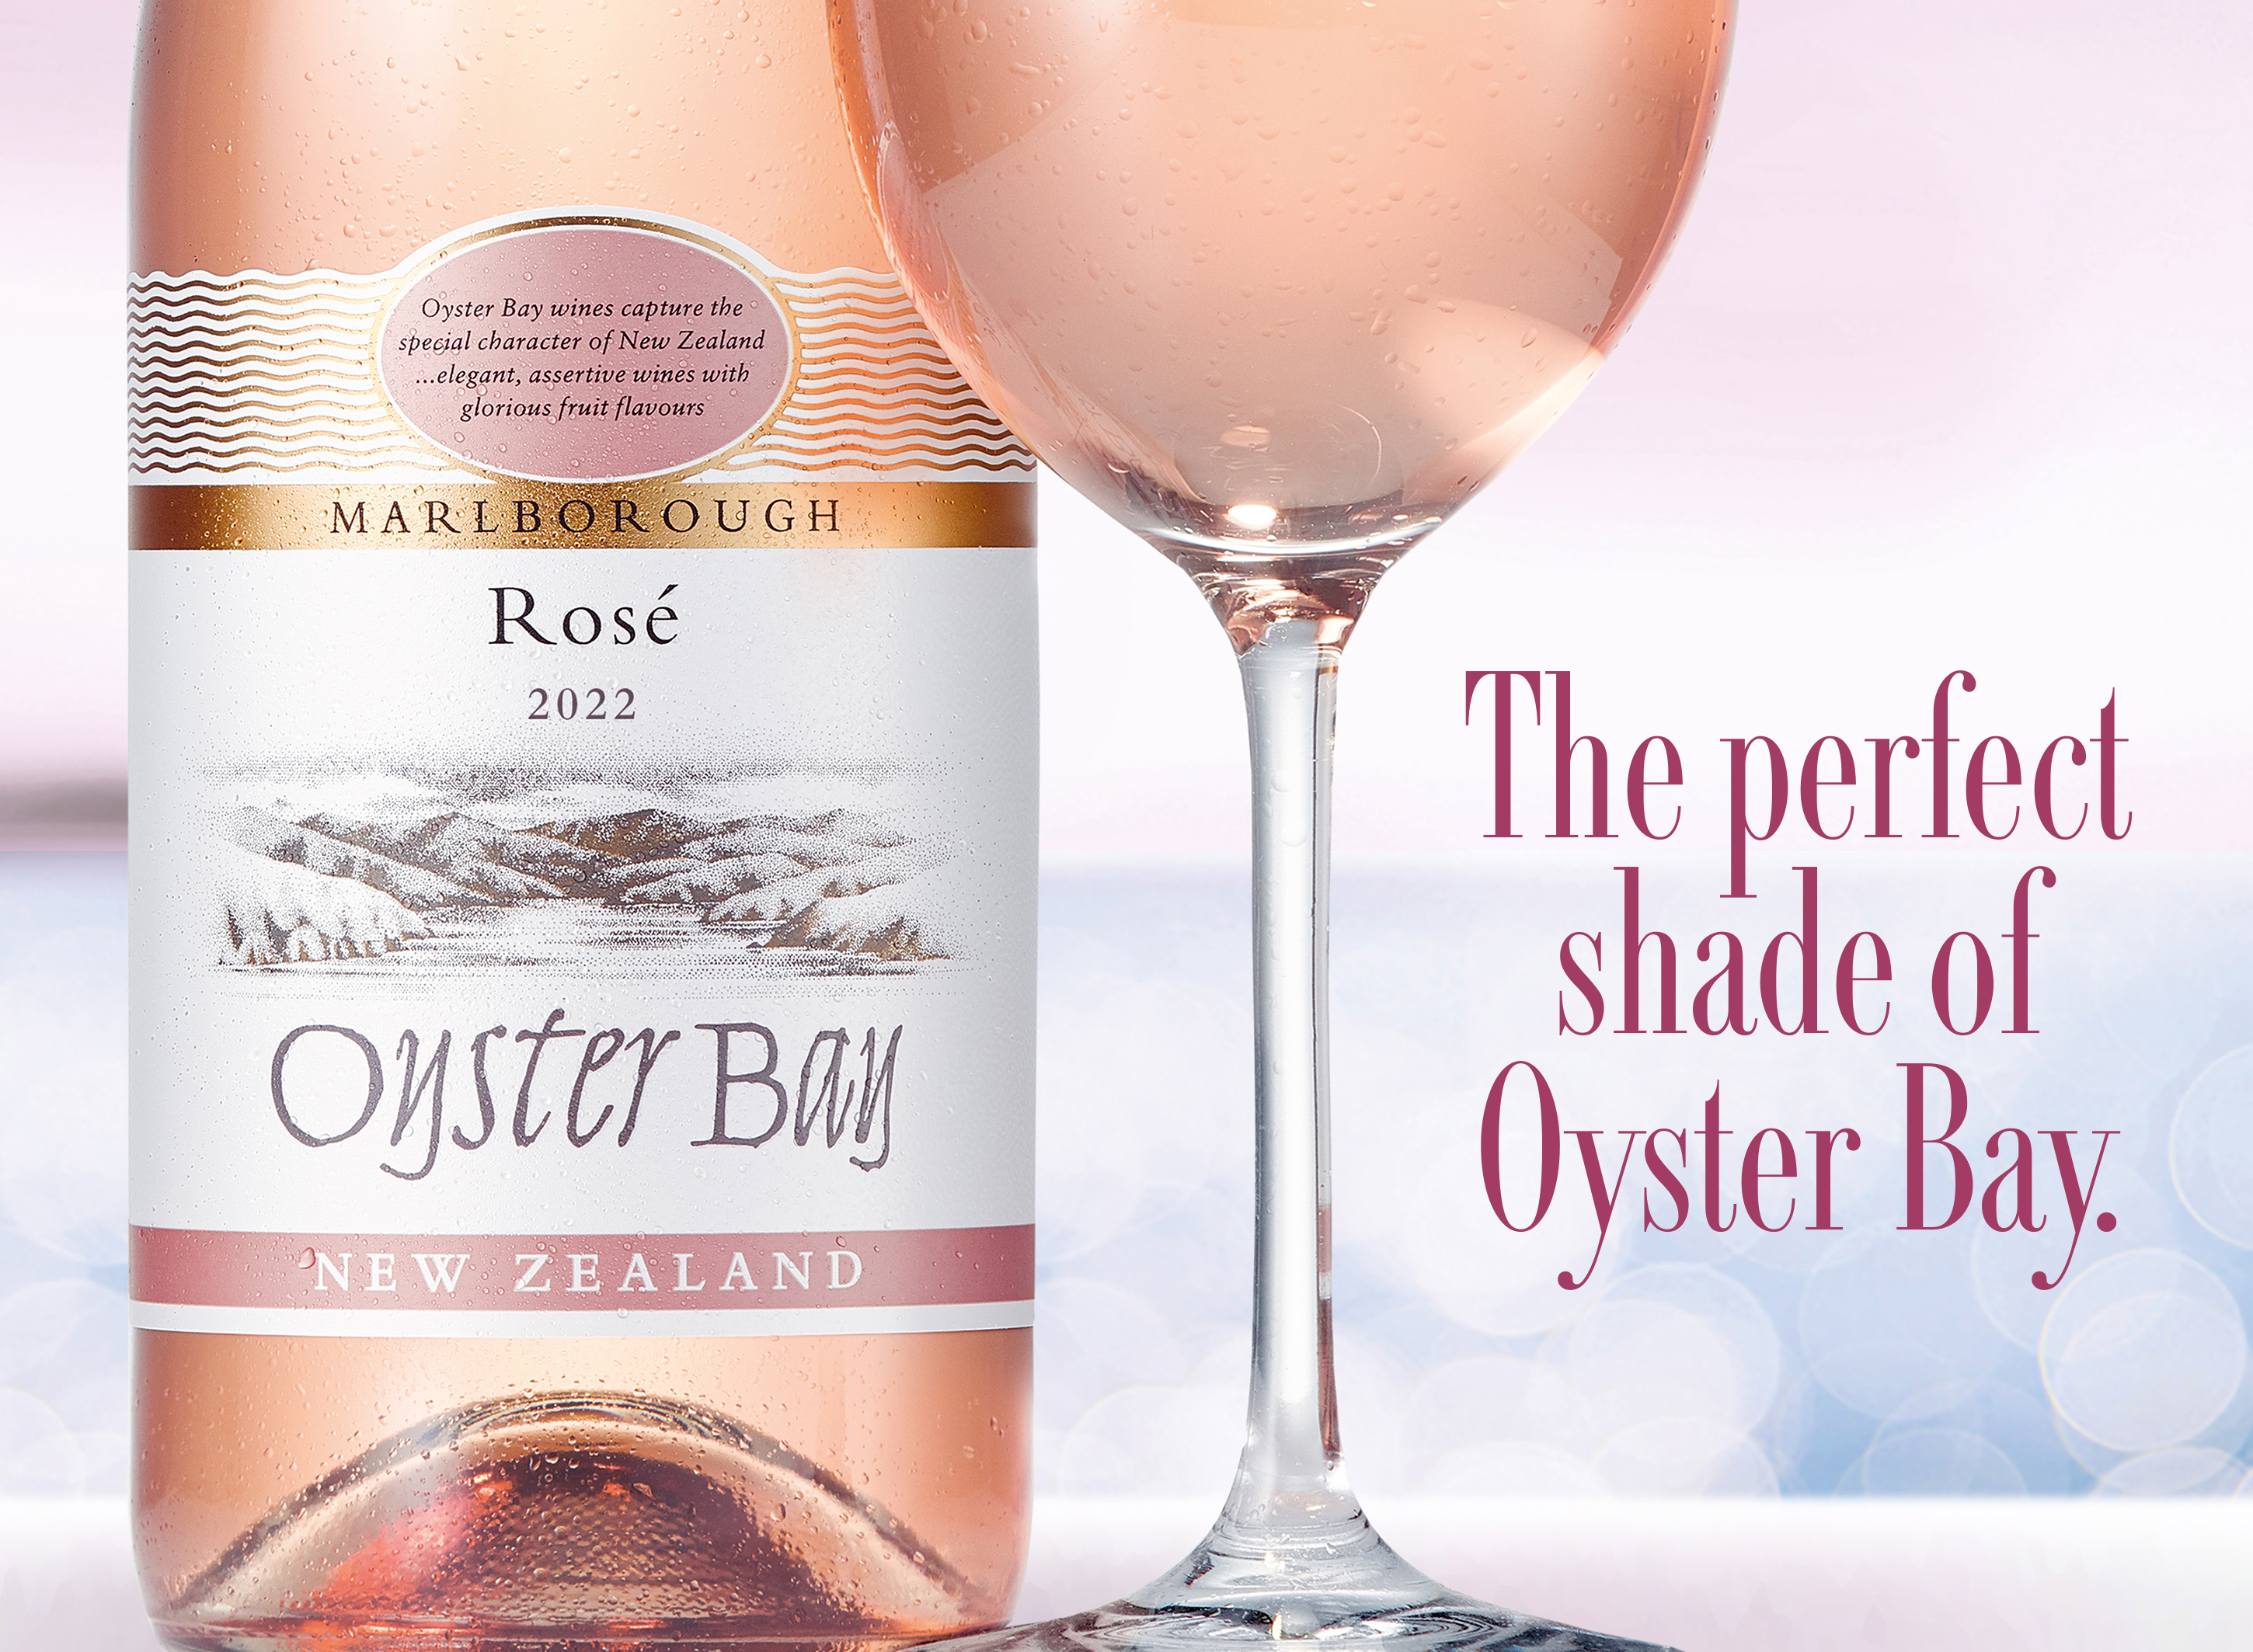 Oyster Bay Marlborough New Zealand Rosé Wine bottle and glass